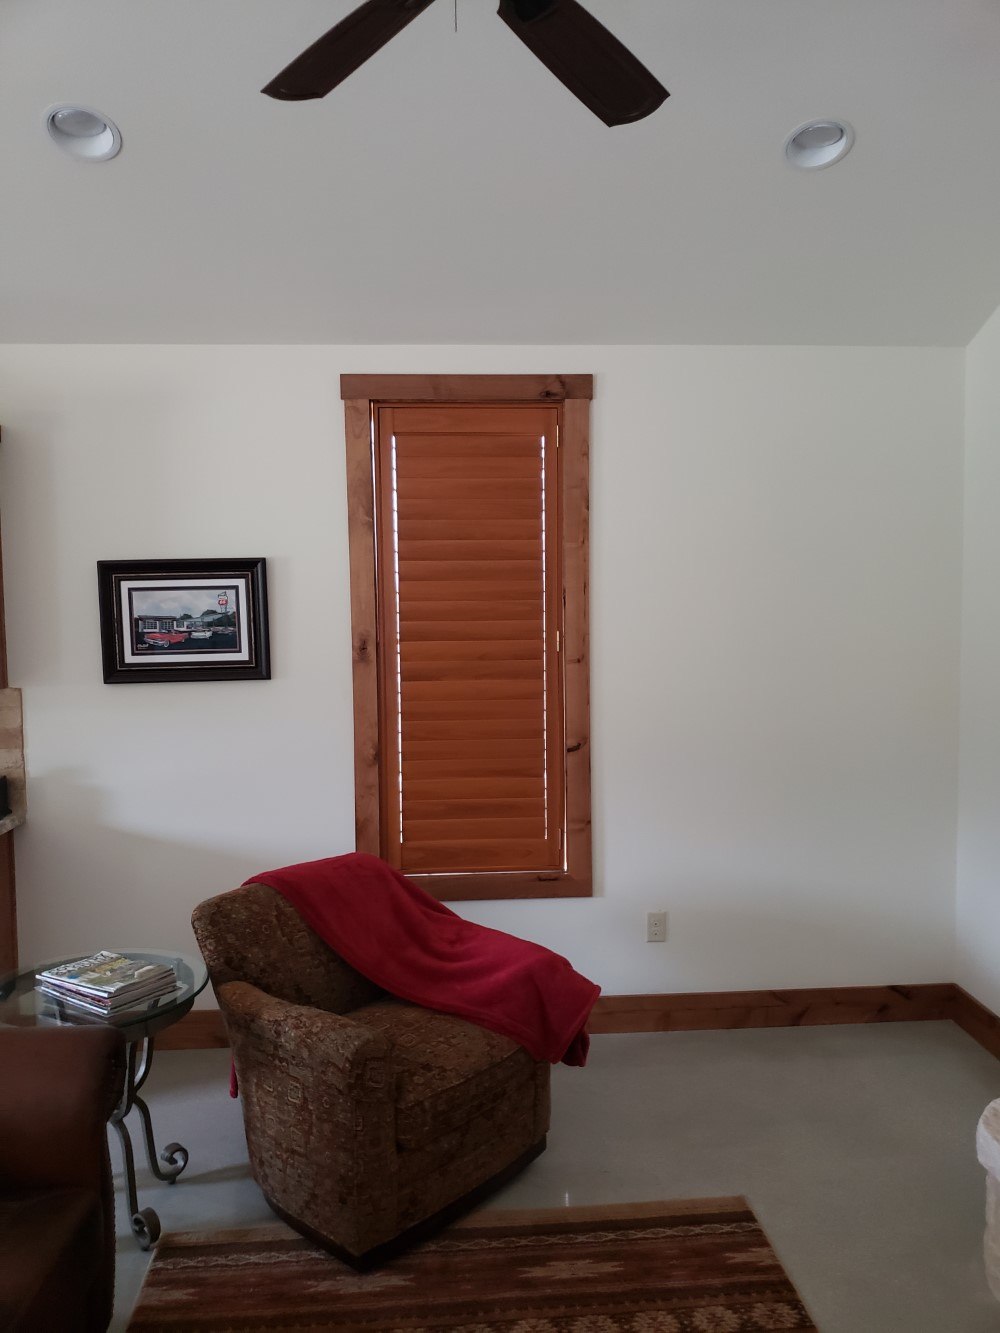 Latest Projects - Hunter Douglas New Style Shutters installed in Medina, Texas